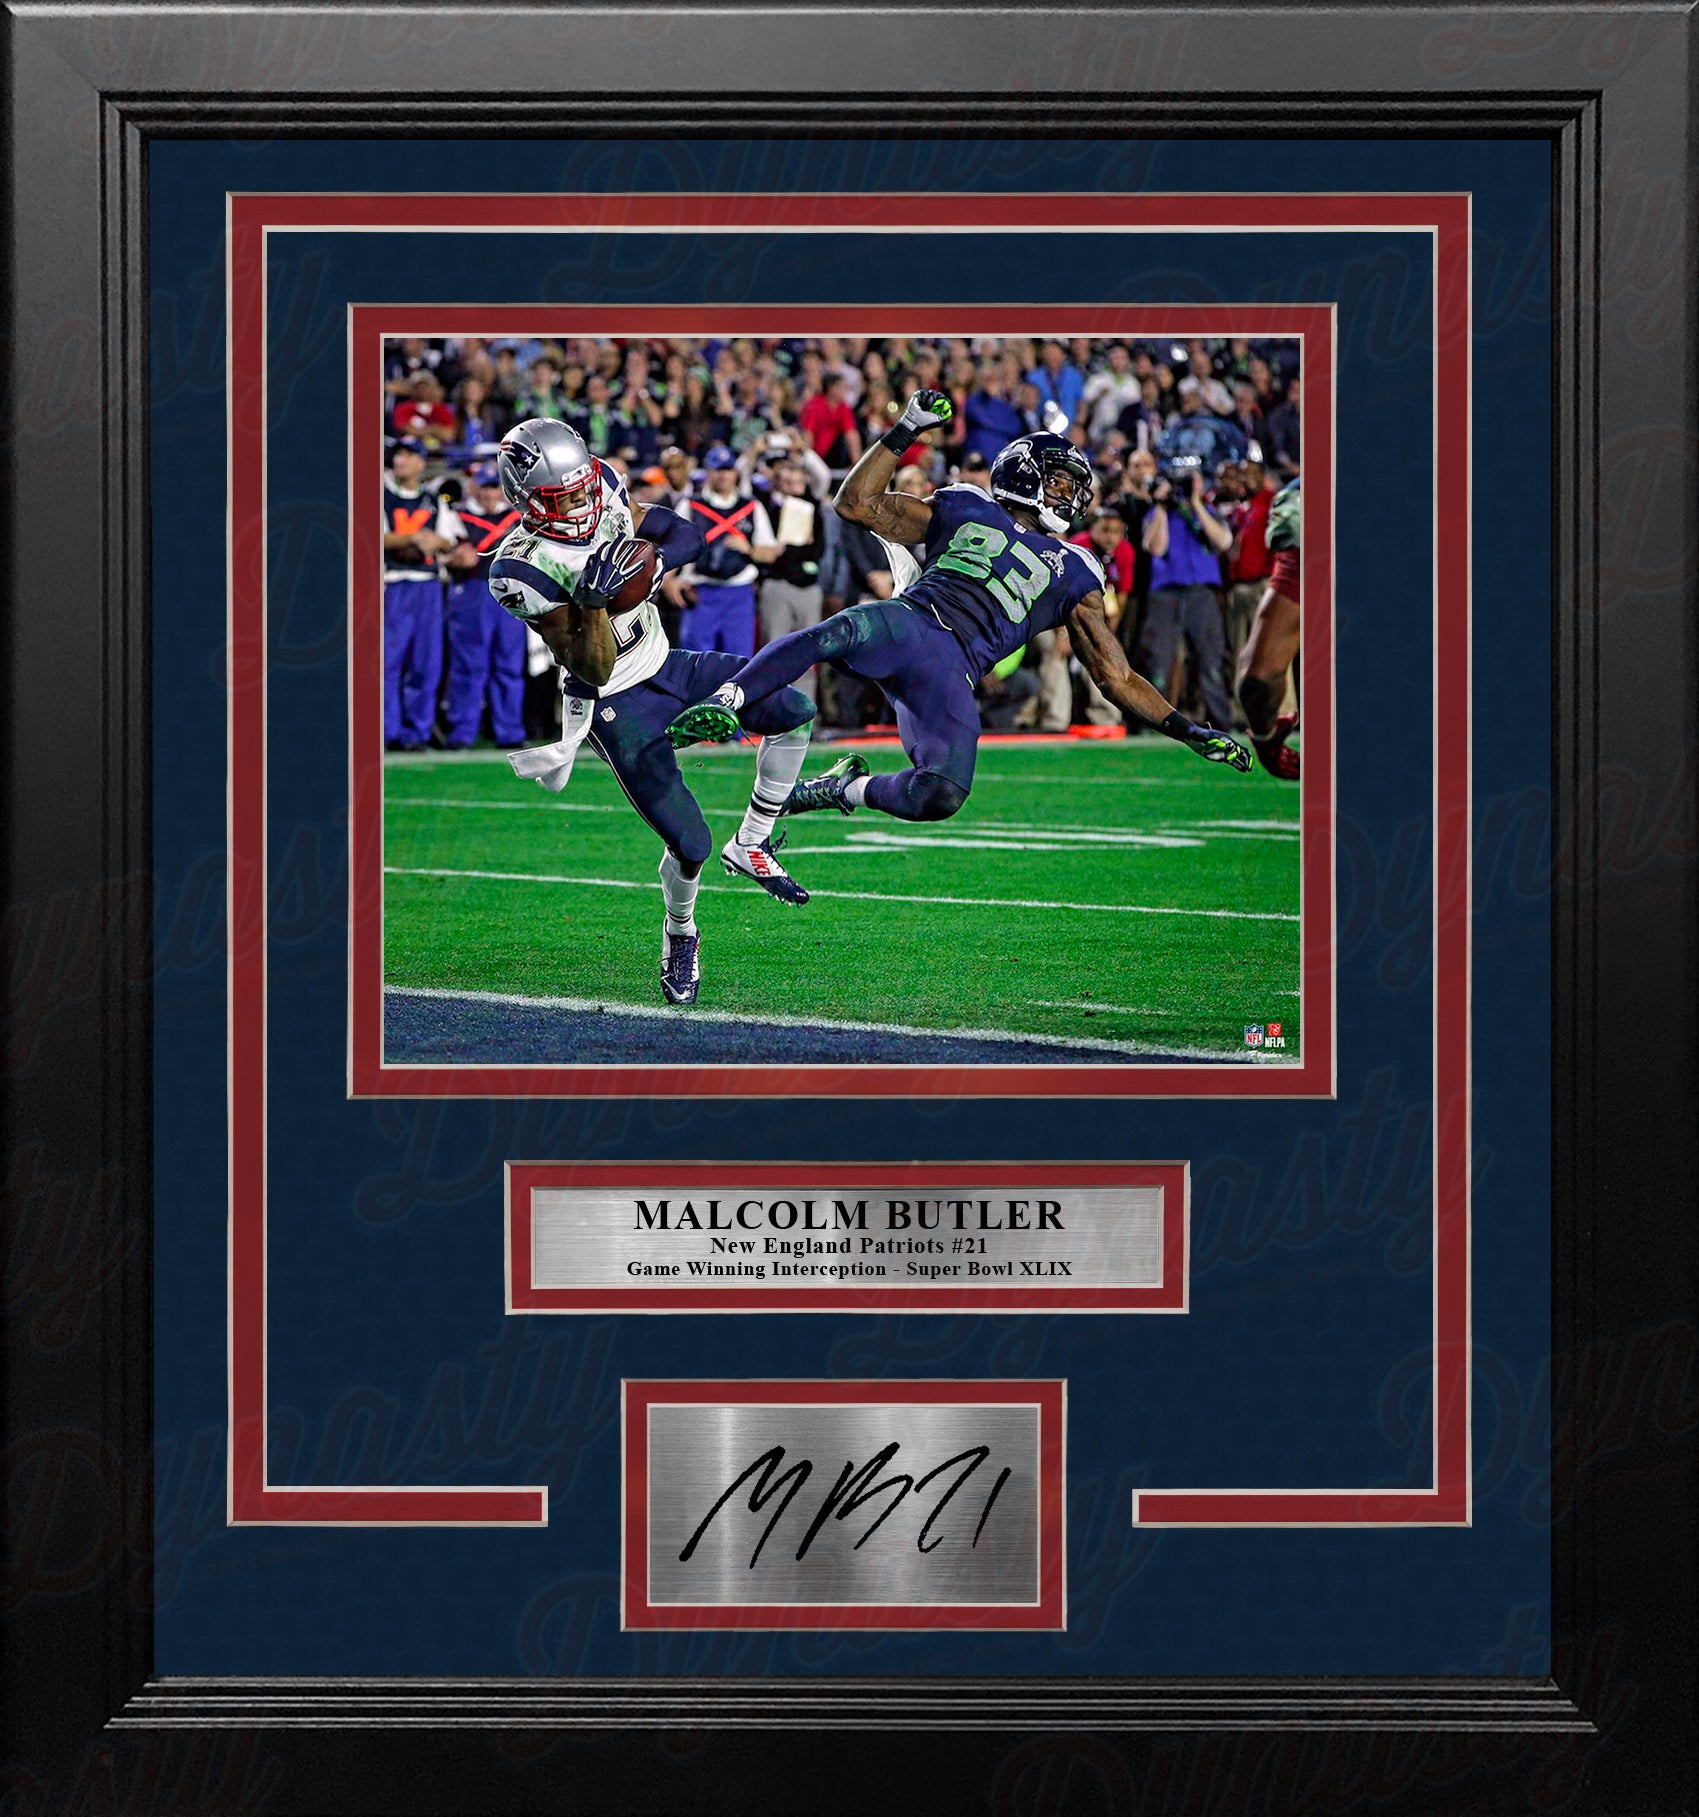 Malcolm Butler Super Bowl Interception New England Patriots 8x10 Framed Photo and Engraved Autograph - Dynasty Sports & Framing 